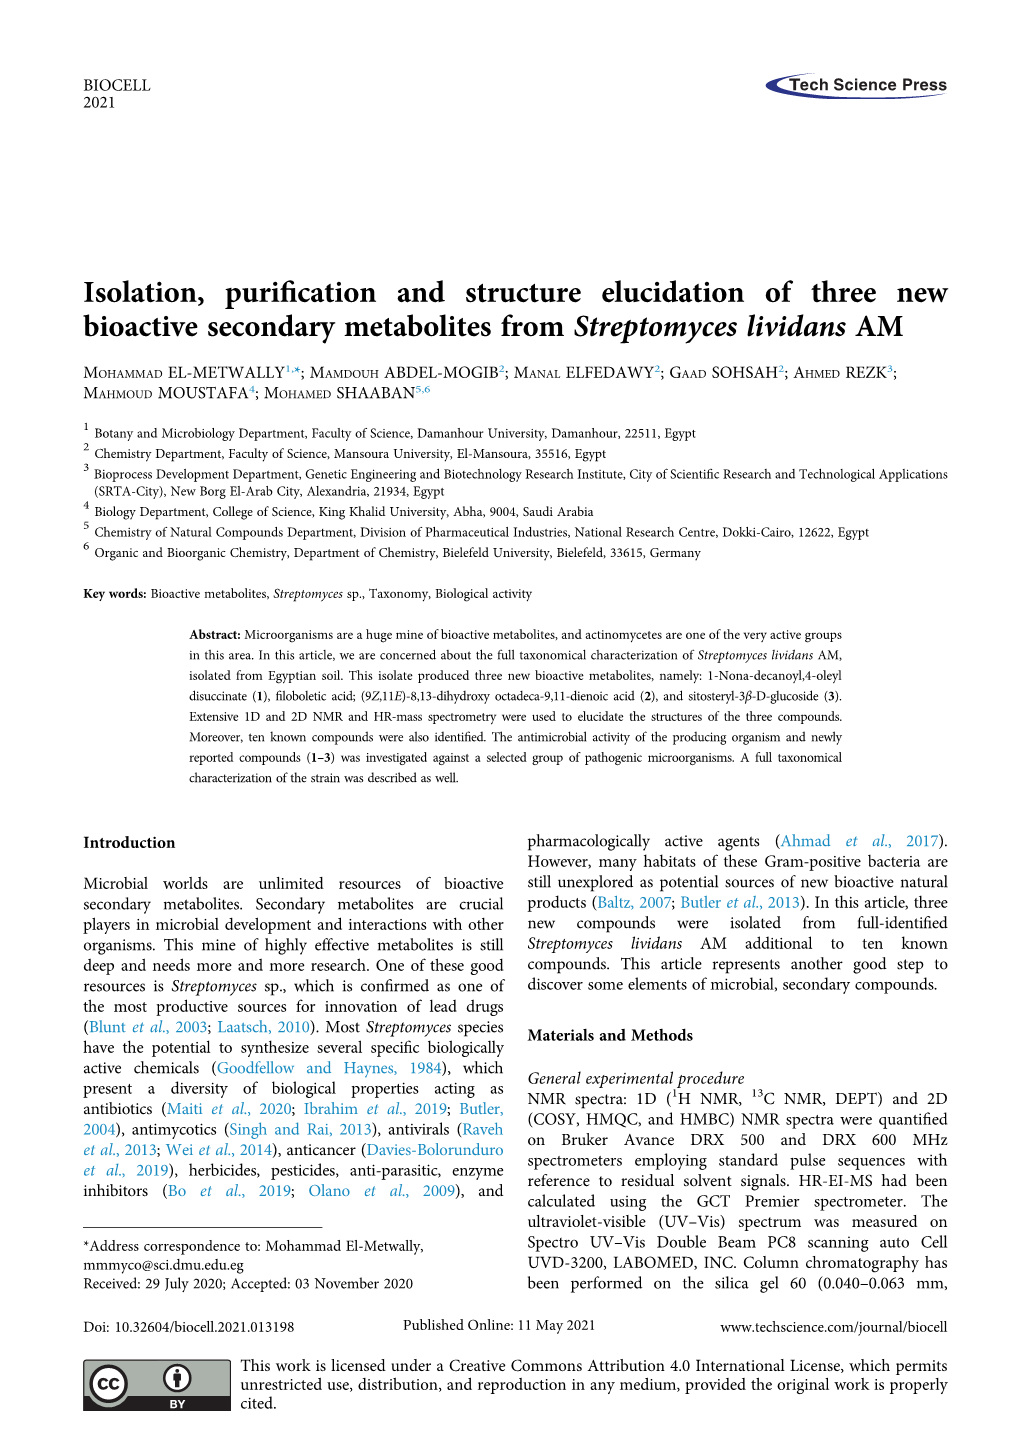 Isolation, Purification and Structure Elucidation of Three New Bioactive